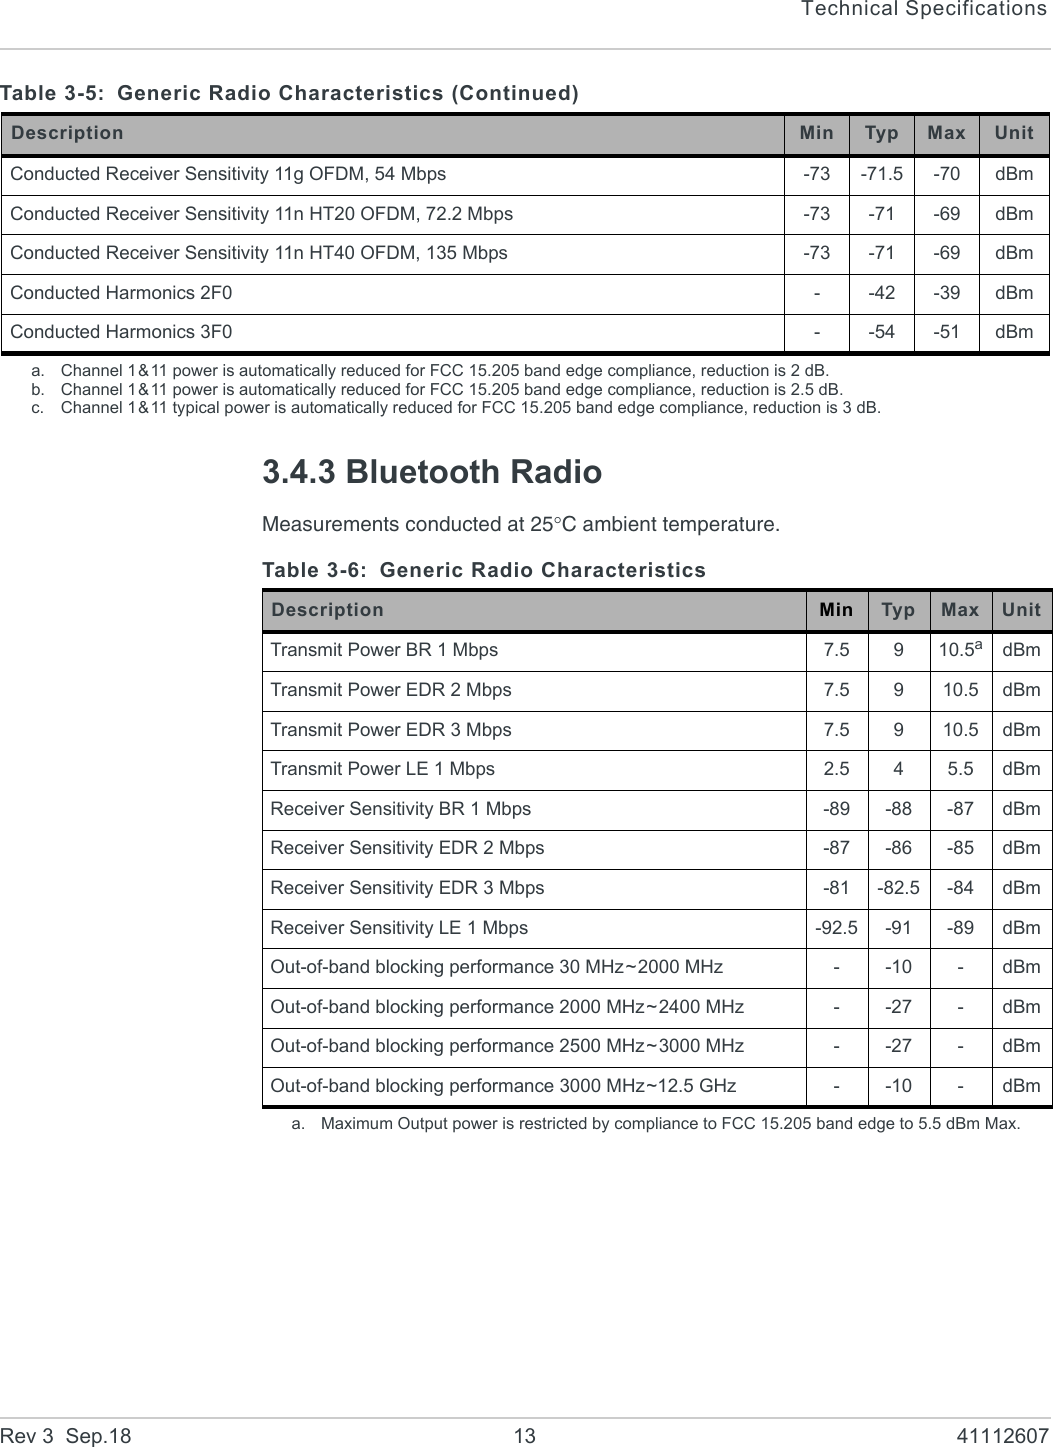 Technical SpecificationsRev 3  Sep.18 13 411126073.4.3 Bluetooth RadioMeasurements conducted at 25C ambient temperature.Conducted Receiver Sensitivity 11g OFDM, 54 Mbps -73 -71.5 -70 dBmConducted Receiver Sensitivity 11n HT20 OFDM, 72.2 Mbps -73 -71 -69 dBmConducted Receiver Sensitivity 11n HT40 OFDM, 135 Mbps -73 -71 -69 dBmConducted Harmonics 2F0 --42 -39 dBmConducted Harmonics 3F0 --54 -51 dBma. Channel 1&amp;11 power is automatically reduced for FCC 15.205 band edge compliance, reduction is 2 dB.b. Channel 1&amp;11 power is automatically reduced for FCC 15.205 band edge compliance, reduction is 2.5 dB.c. Channel 1&amp;11 typical power is automatically reduced for FCC 15.205 band edge compliance, reduction is 3 dB.Table 3-5: Generic Radio Characteristics (Continued)Description Min Typ Max UnitTable 3-6: Generic Radio CharacteristicsDescription Min Typ Max UnitTransmit Power BR 1 Mbps 7.5 910.5aa. Maximum Output power is restricted by compliance to FCC 15.205 band edge to 5.5 dBm Max.dBmTransmit Power EDR 2 Mbps 7.5 910.5 dBmTransmit Power EDR 3 Mbps 7.5 910.5 dBmTransmit Power LE 1 Mbps 2.5 45.5 dBmReceiver Sensitivity BR 1 Mbps -89 -88 -87 dBmReceiver Sensitivity EDR 2 Mbps -87 -86 -85 dBmReceiver Sensitivity EDR 3 Mbps -81 -82.5 -84 dBmReceiver Sensitivity LE 1 Mbps -92.5 -91 -89 dBmOut-of-band blocking performance 30 MHz~2000 MHz --10 -dBmOut-of-band blocking performance 2000 MHz~2400 MHz --27 -dBmOut-of-band blocking performance 2500 MHz~3000 MHz --27 -dBmOut-of-band blocking performance 3000 MHz~12.5 GHz --10 -dBm